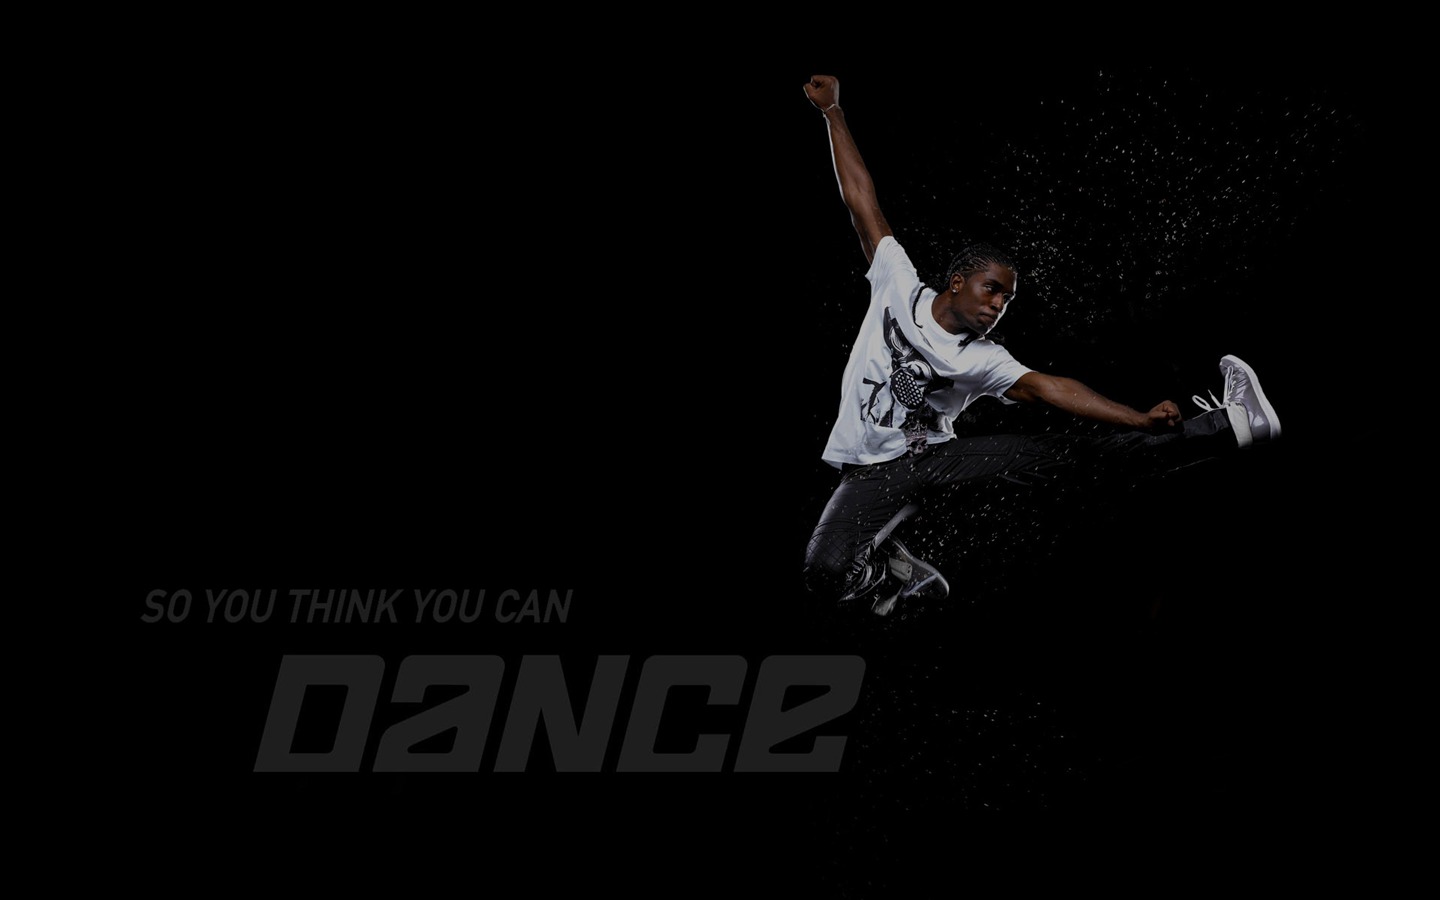 So You Think You Can Dance 舞林争霸 壁纸(二)4 - 1440x900